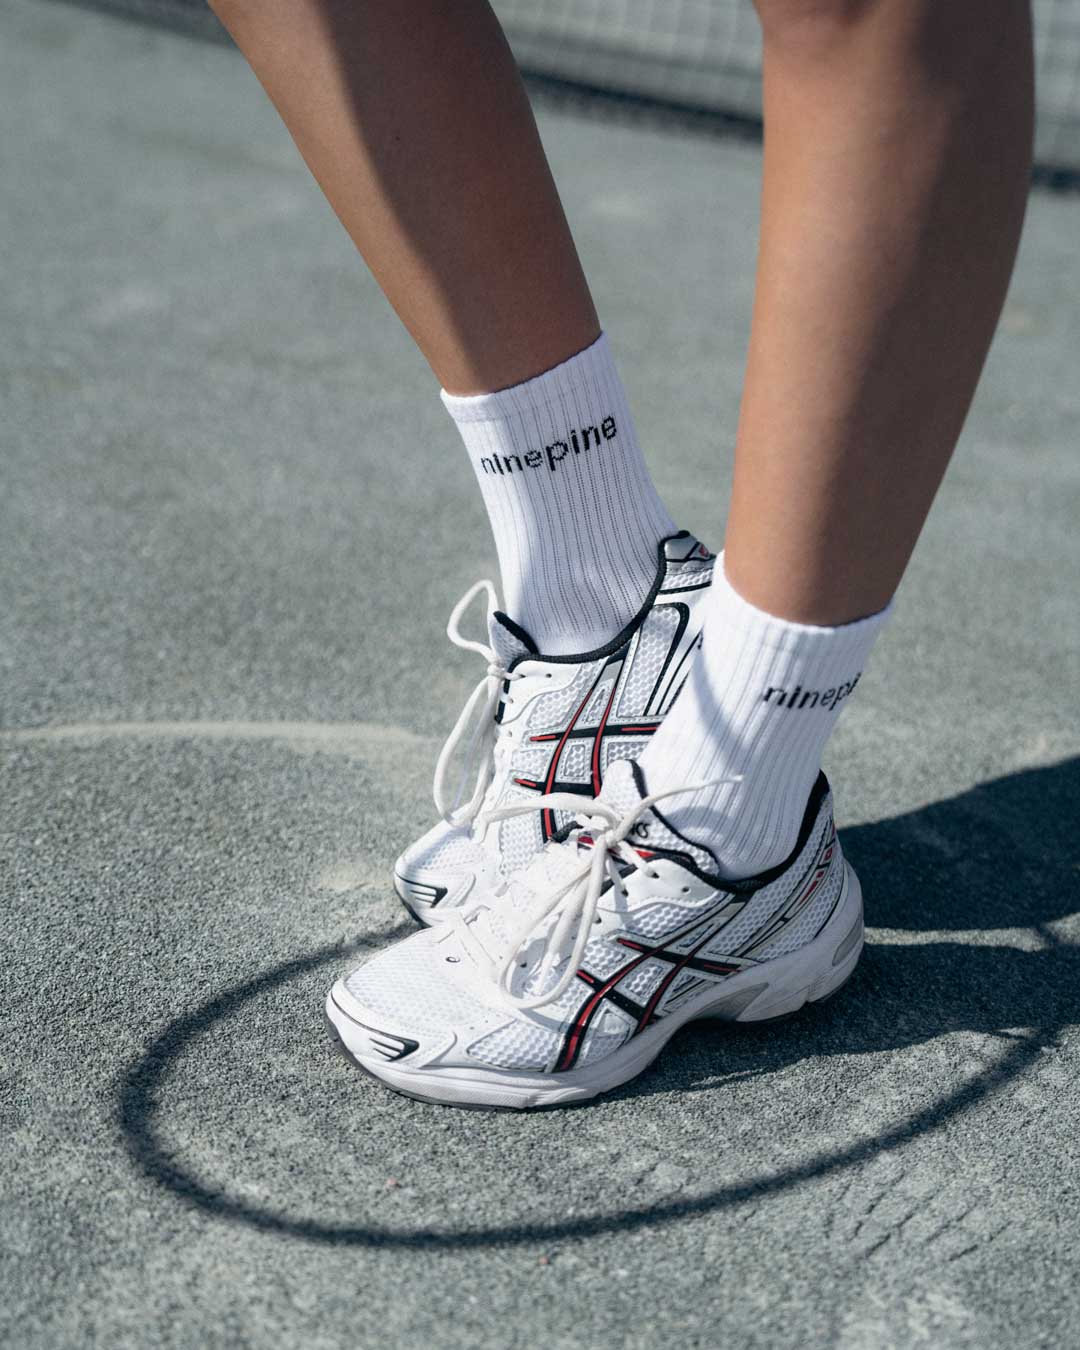 Close up of ninepine white socks and asics tennis shoes on tennis court